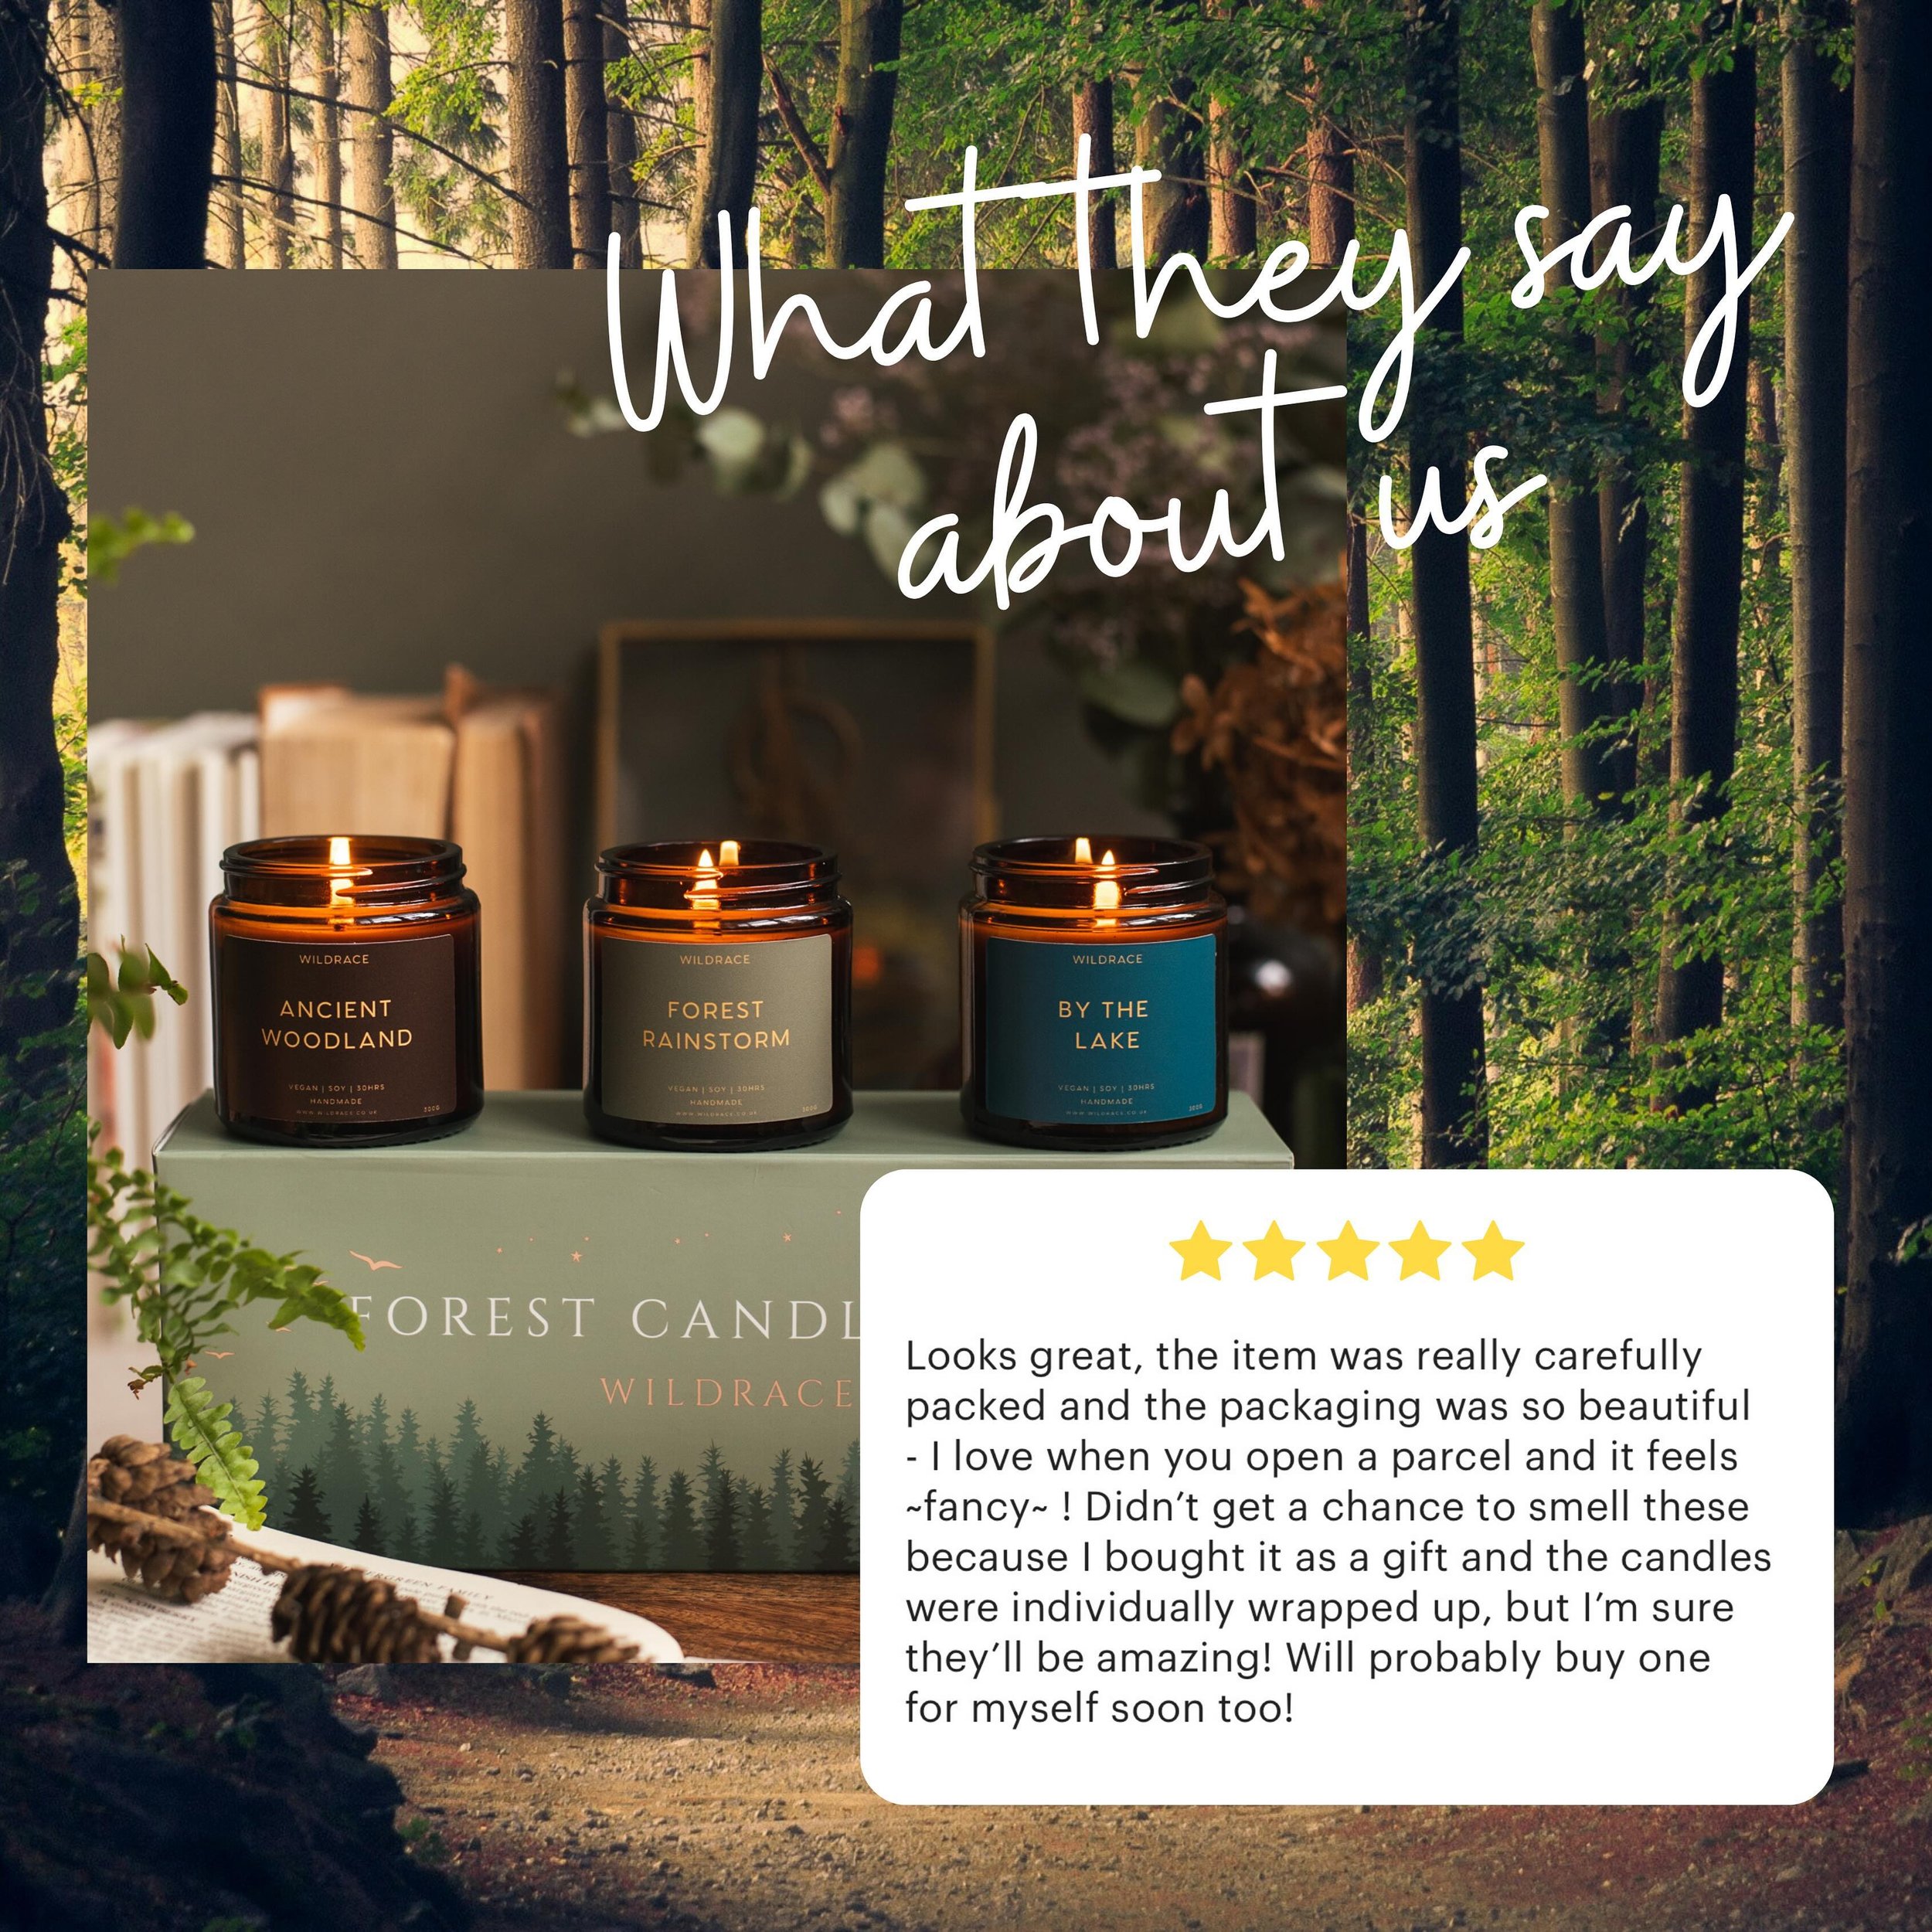 Our customers are loving the new gift sets, this is my favourite review so far, so happy the fancy packaging has been appreciated 🌲 

Did you know, we have a second gift set coming this year 😍

#wildrace #candlereviews #candlegiftset